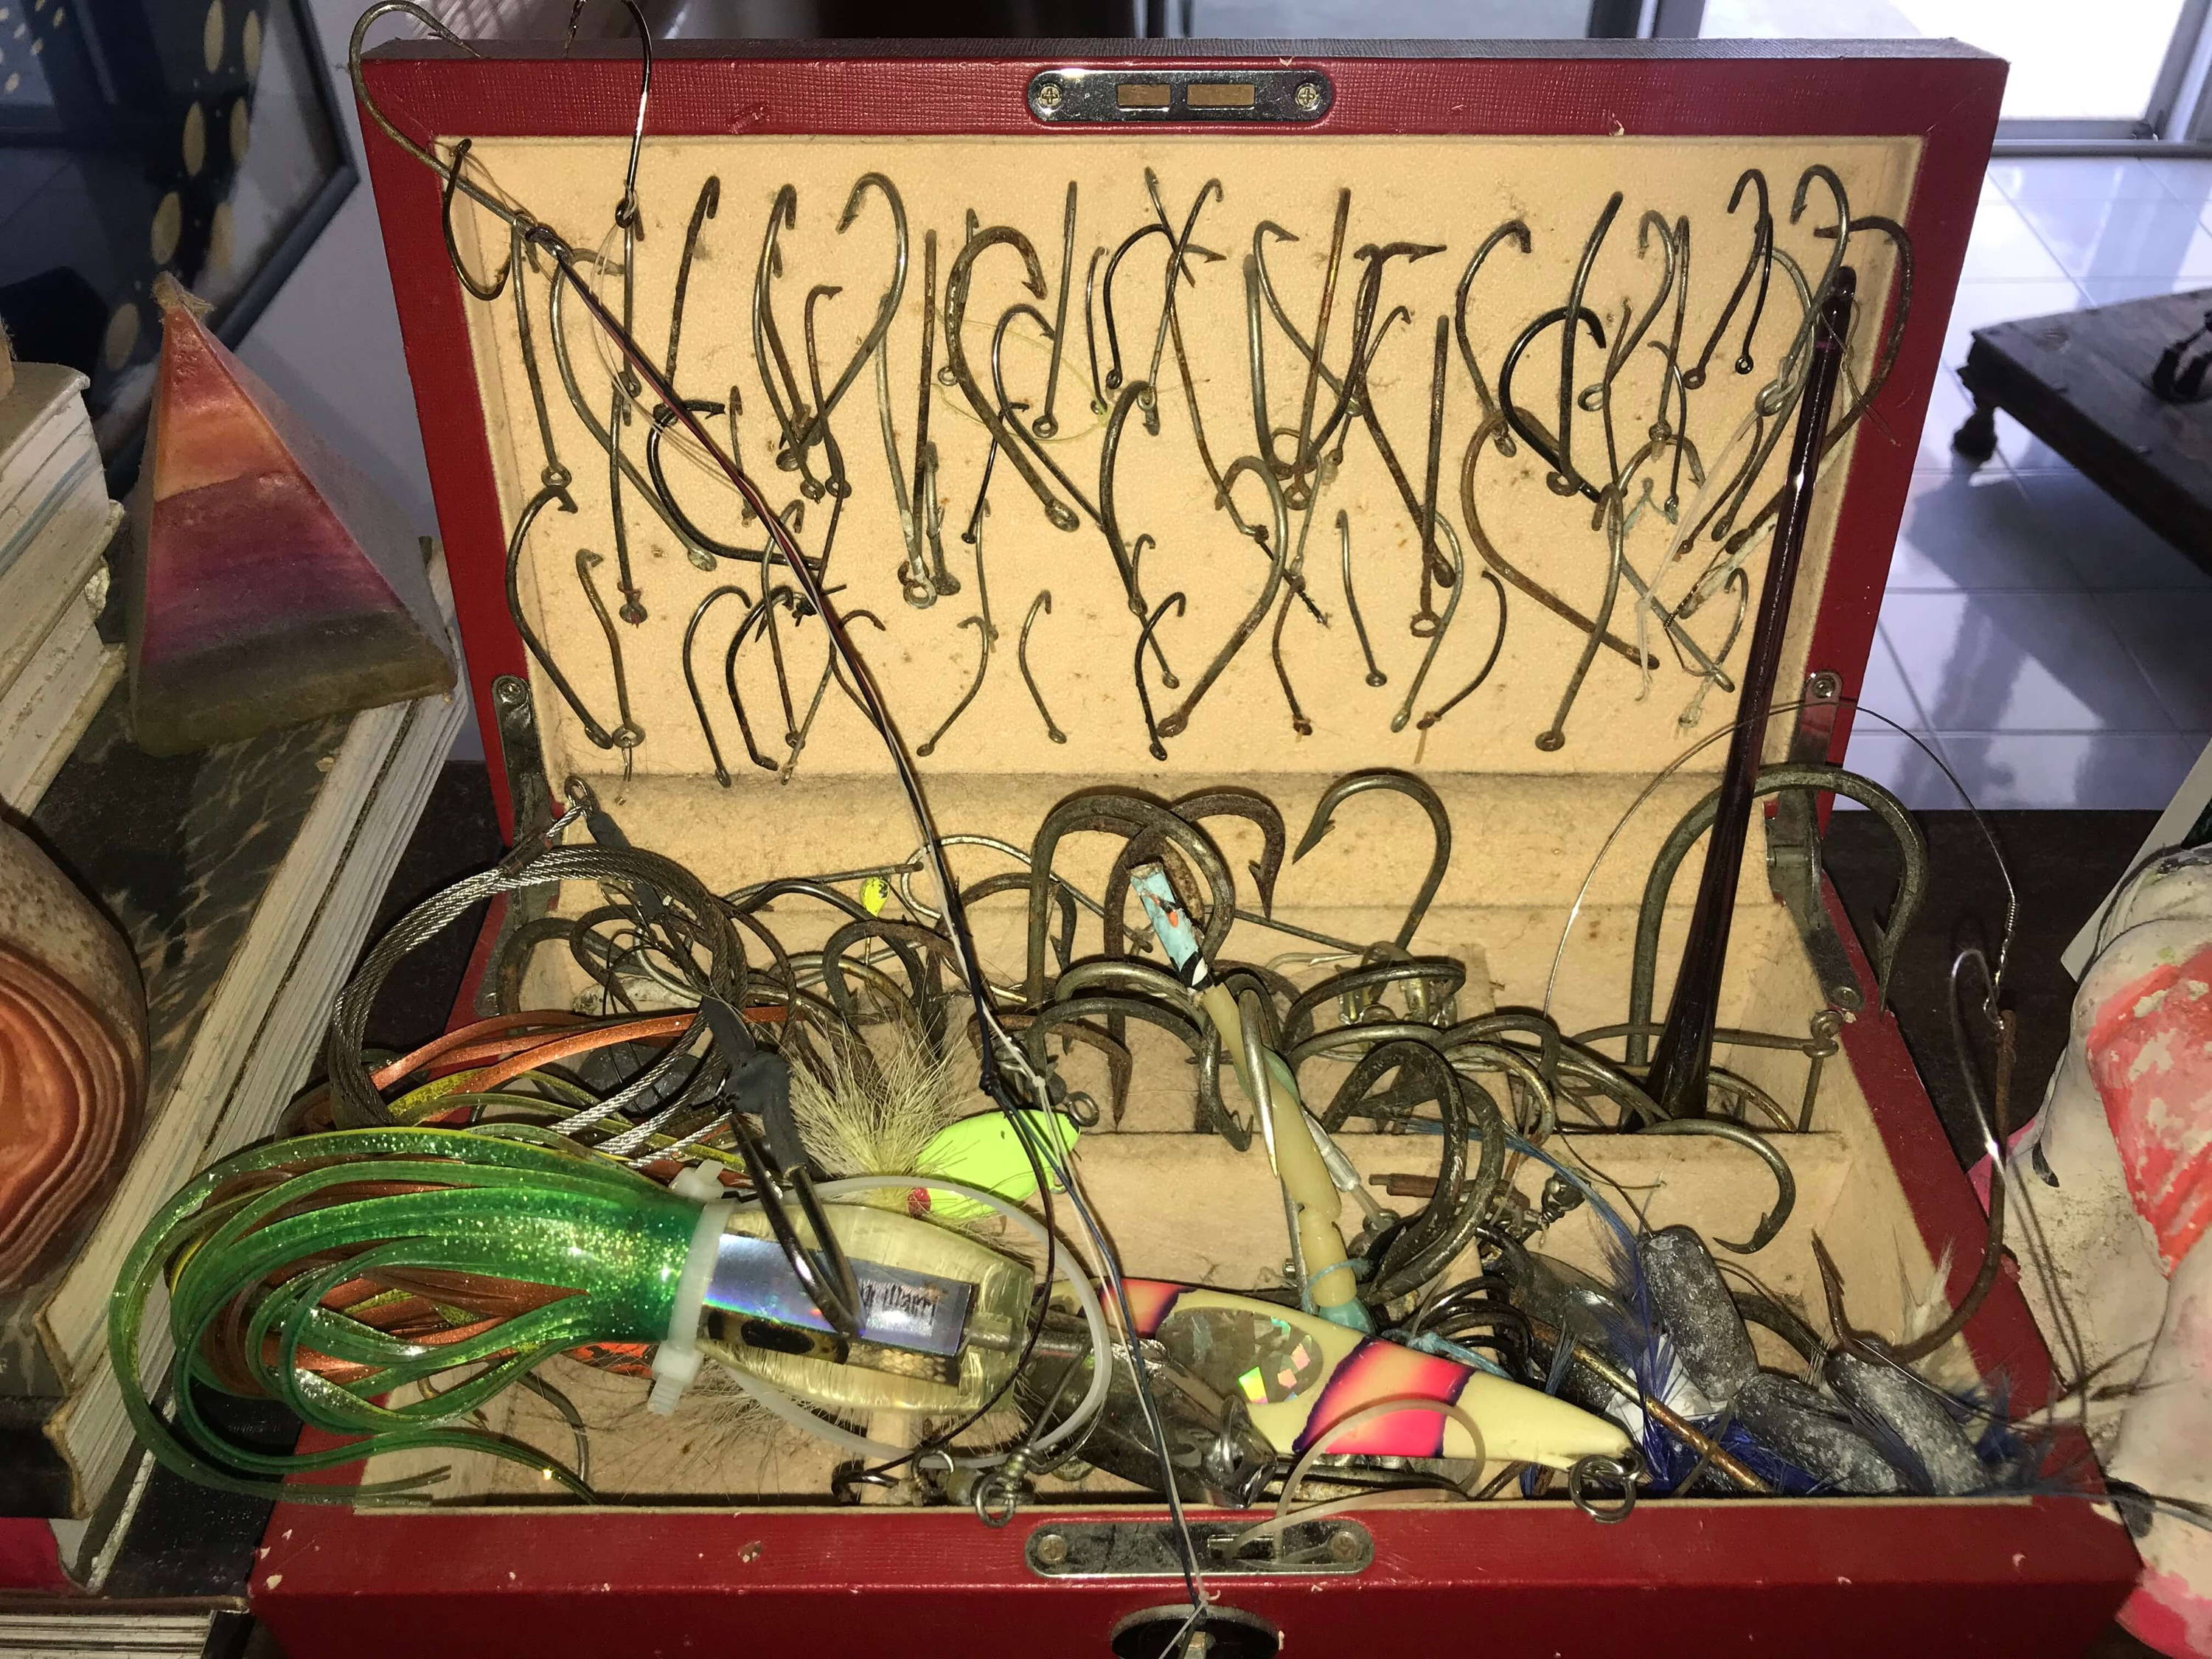 “The hooks I have removed from the sharks through the years, a symbol of the damage we can cause to our environment, but also an example of how each one of us can do something to reverse it. I received the box as a gift when I was invited to visit China to help local famous people campaign against shark fin soup. It's my box of hope!”